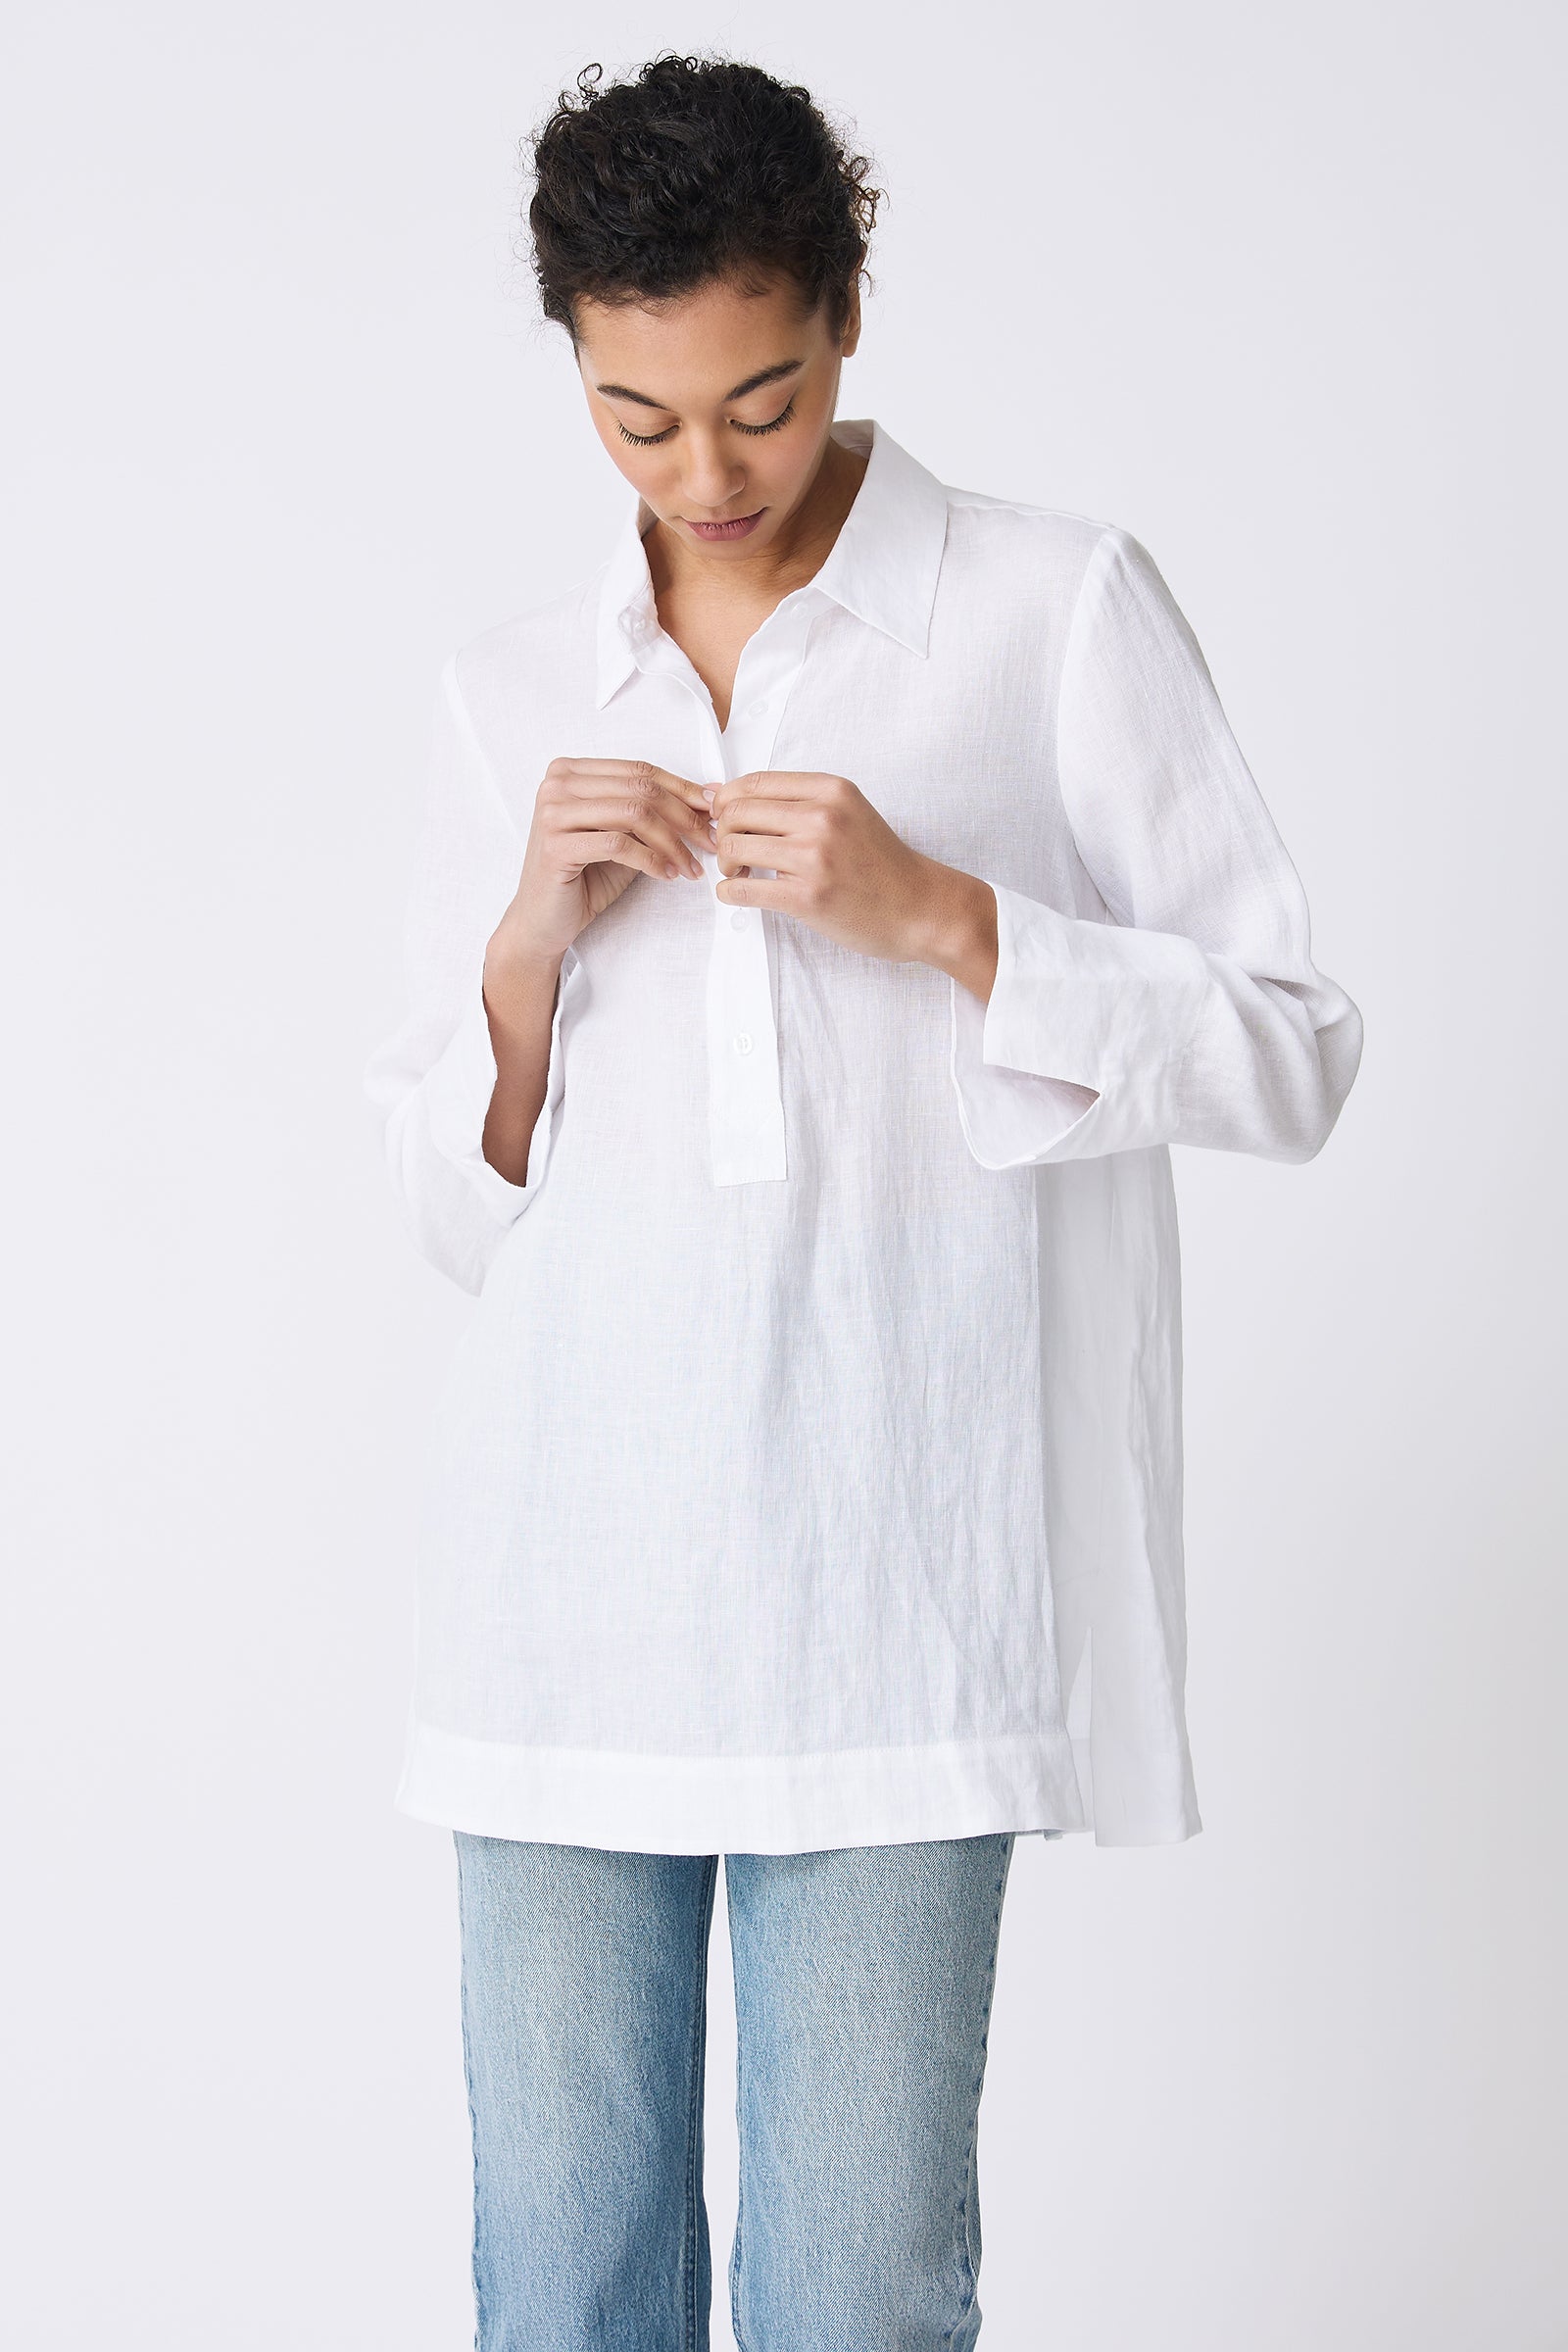 Kal Rieman Inez Placket Tunic in White on model buttoning shirt front view